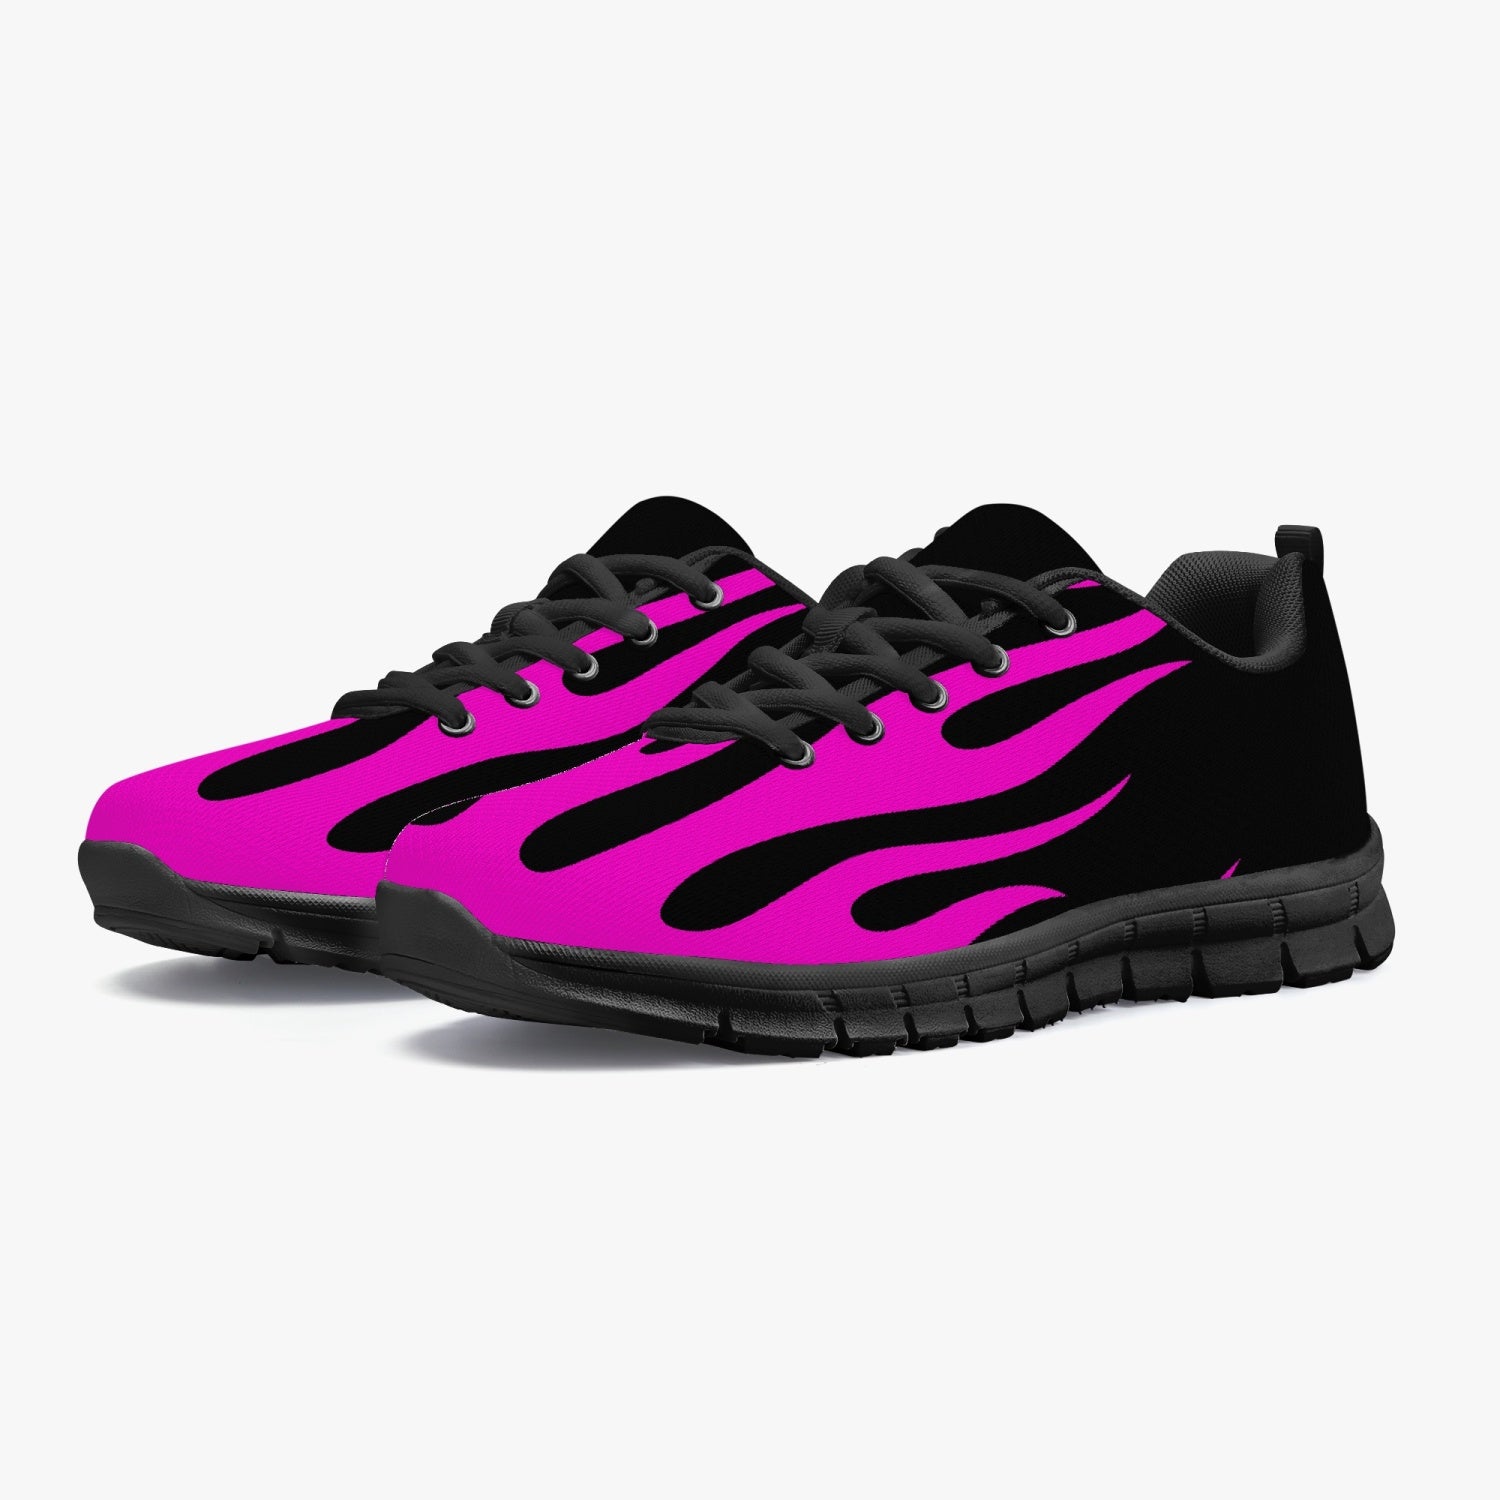 Women's Classic Pink Fire Flames Drip Running Gym Sneakers Overview